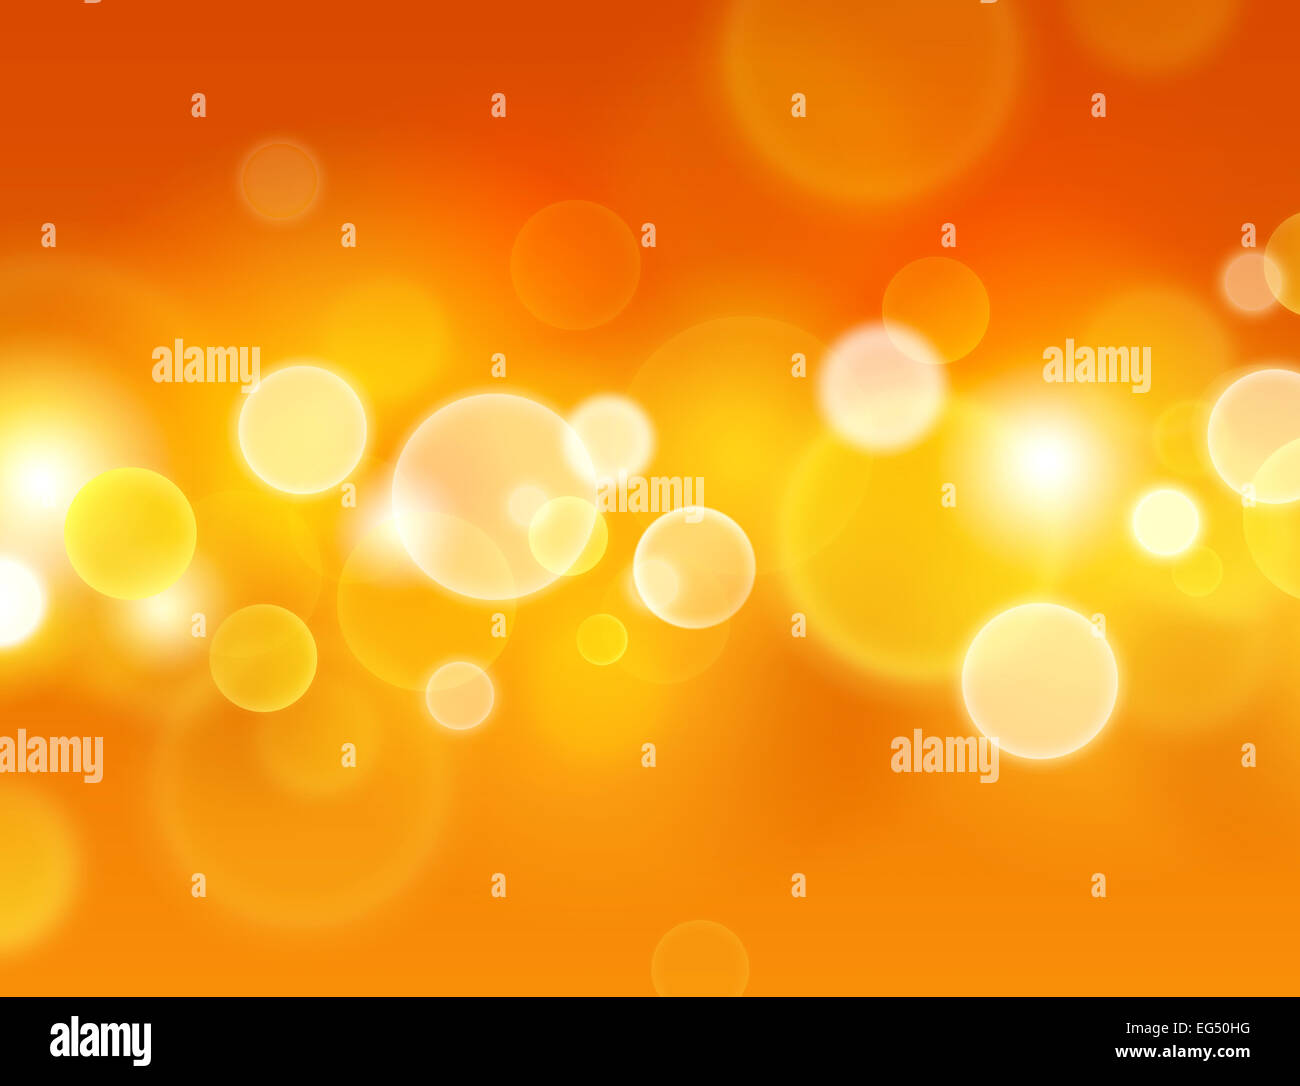 Summer sensation. Abstract warm background with glowing light circle effects Stock Photo